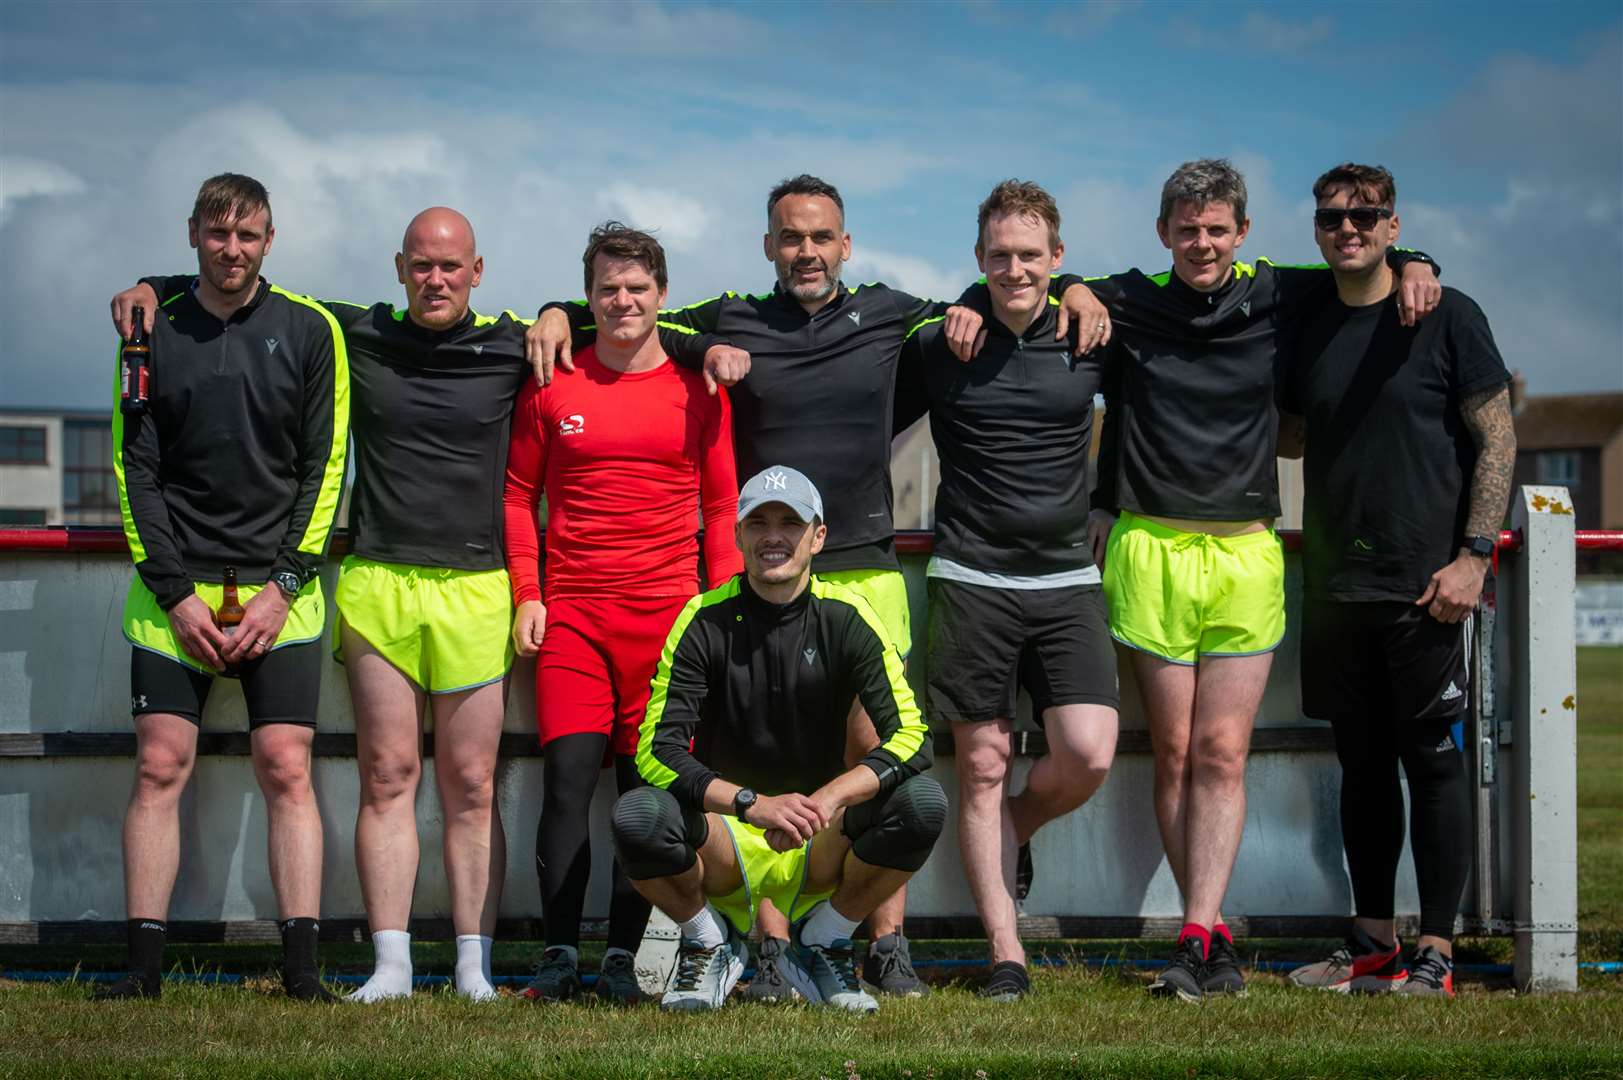 Richie Hart (centre) pictured with Steven Mackay (kneeling front) taking part in an ultra marathon.